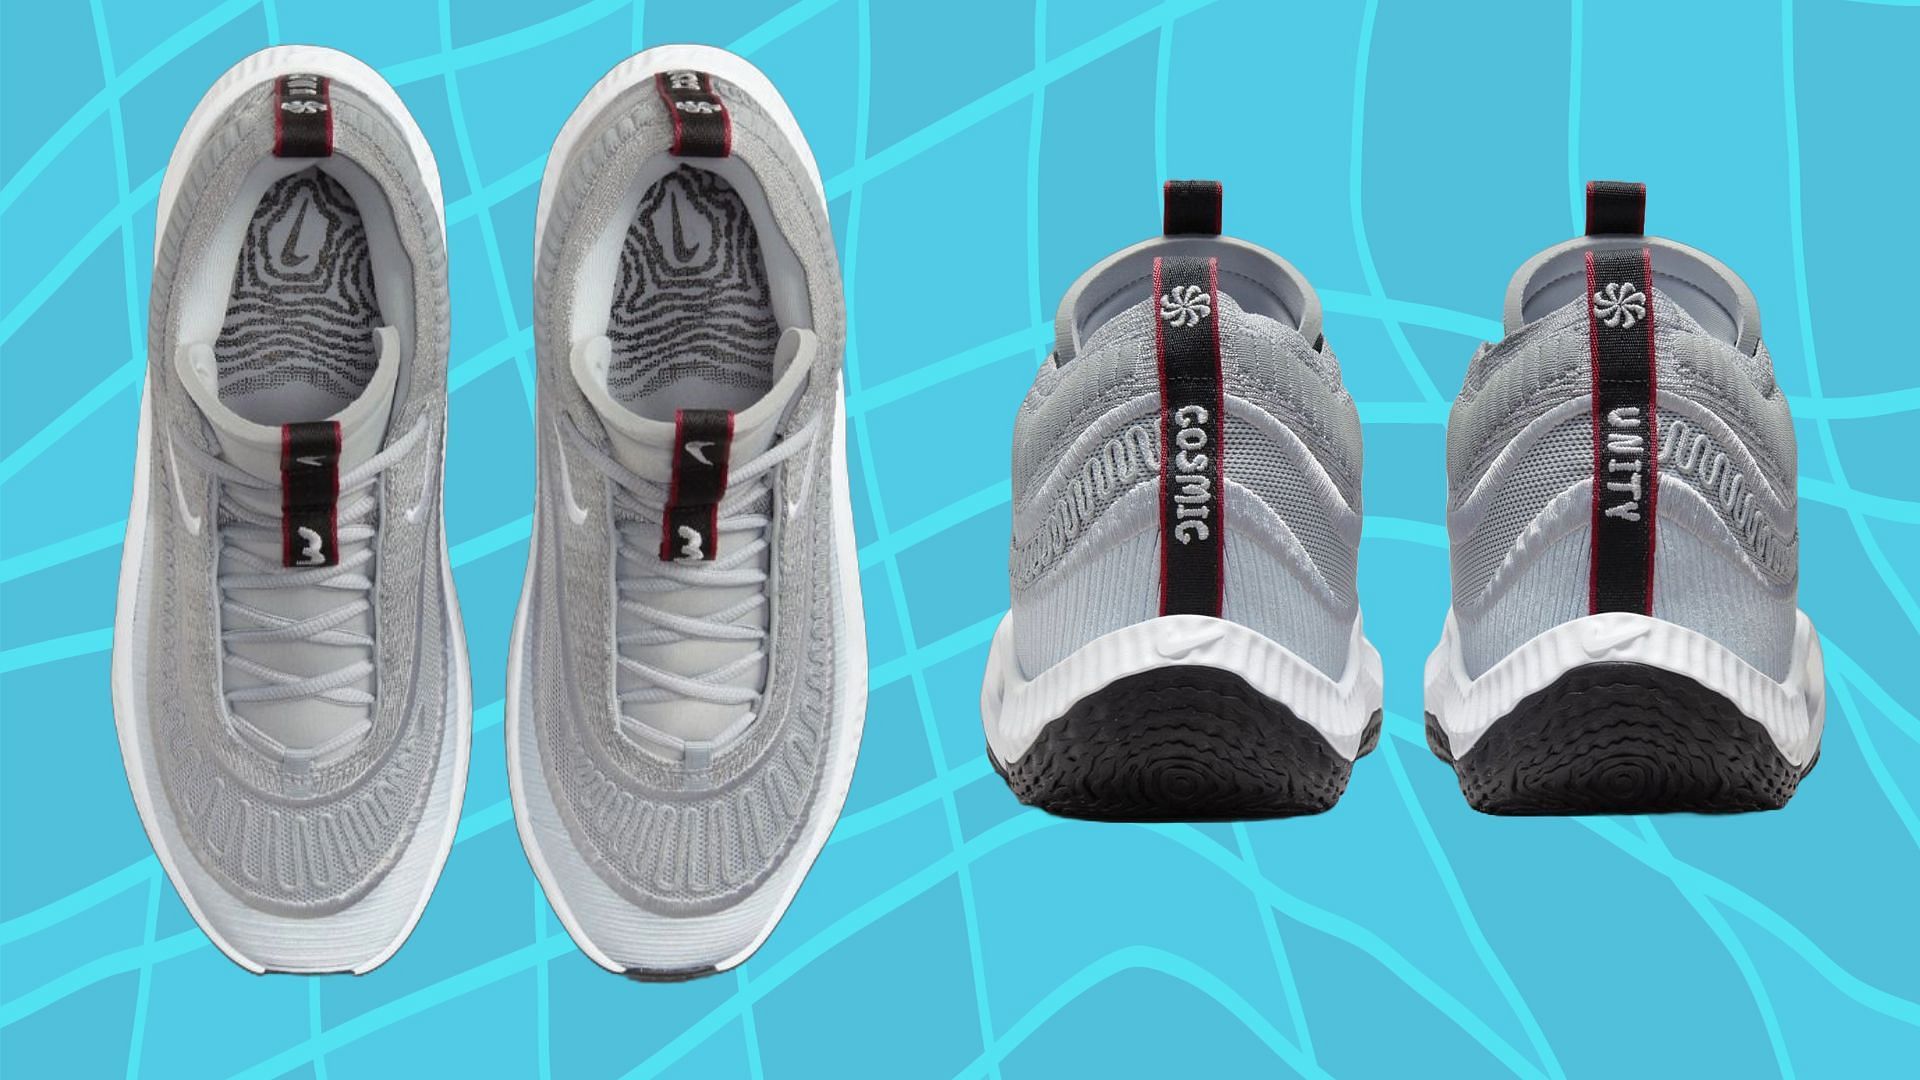 Another look at the Nike Cosmic Unity 3 Silver Bullet sneakers ( Image via Nike)